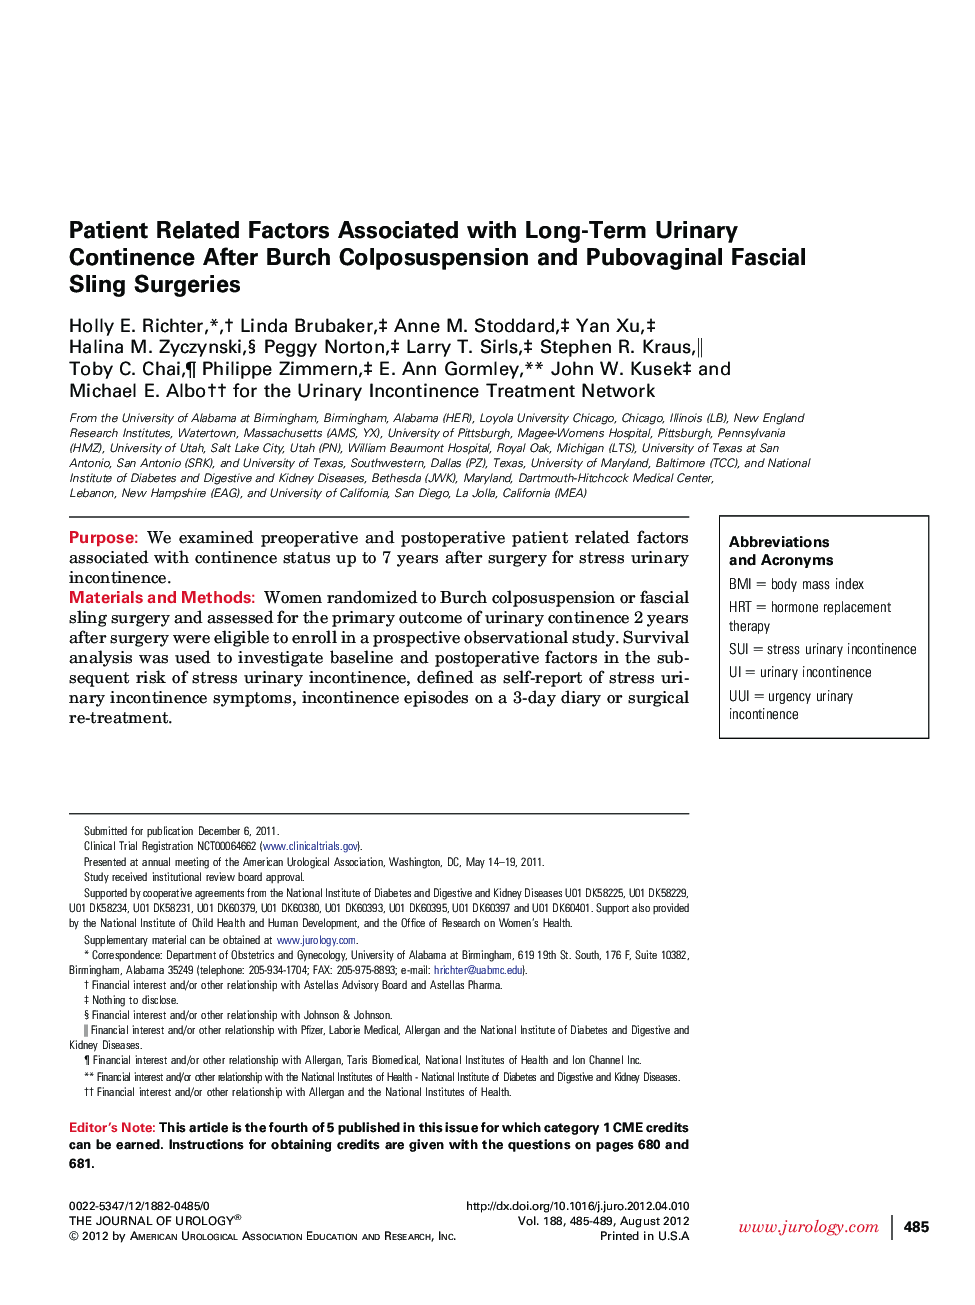 Patient Related Factors Associated with Long-Term Urinary Continence After Burch Colposuspension and Pubovaginal Fascial Sling Surgeries 